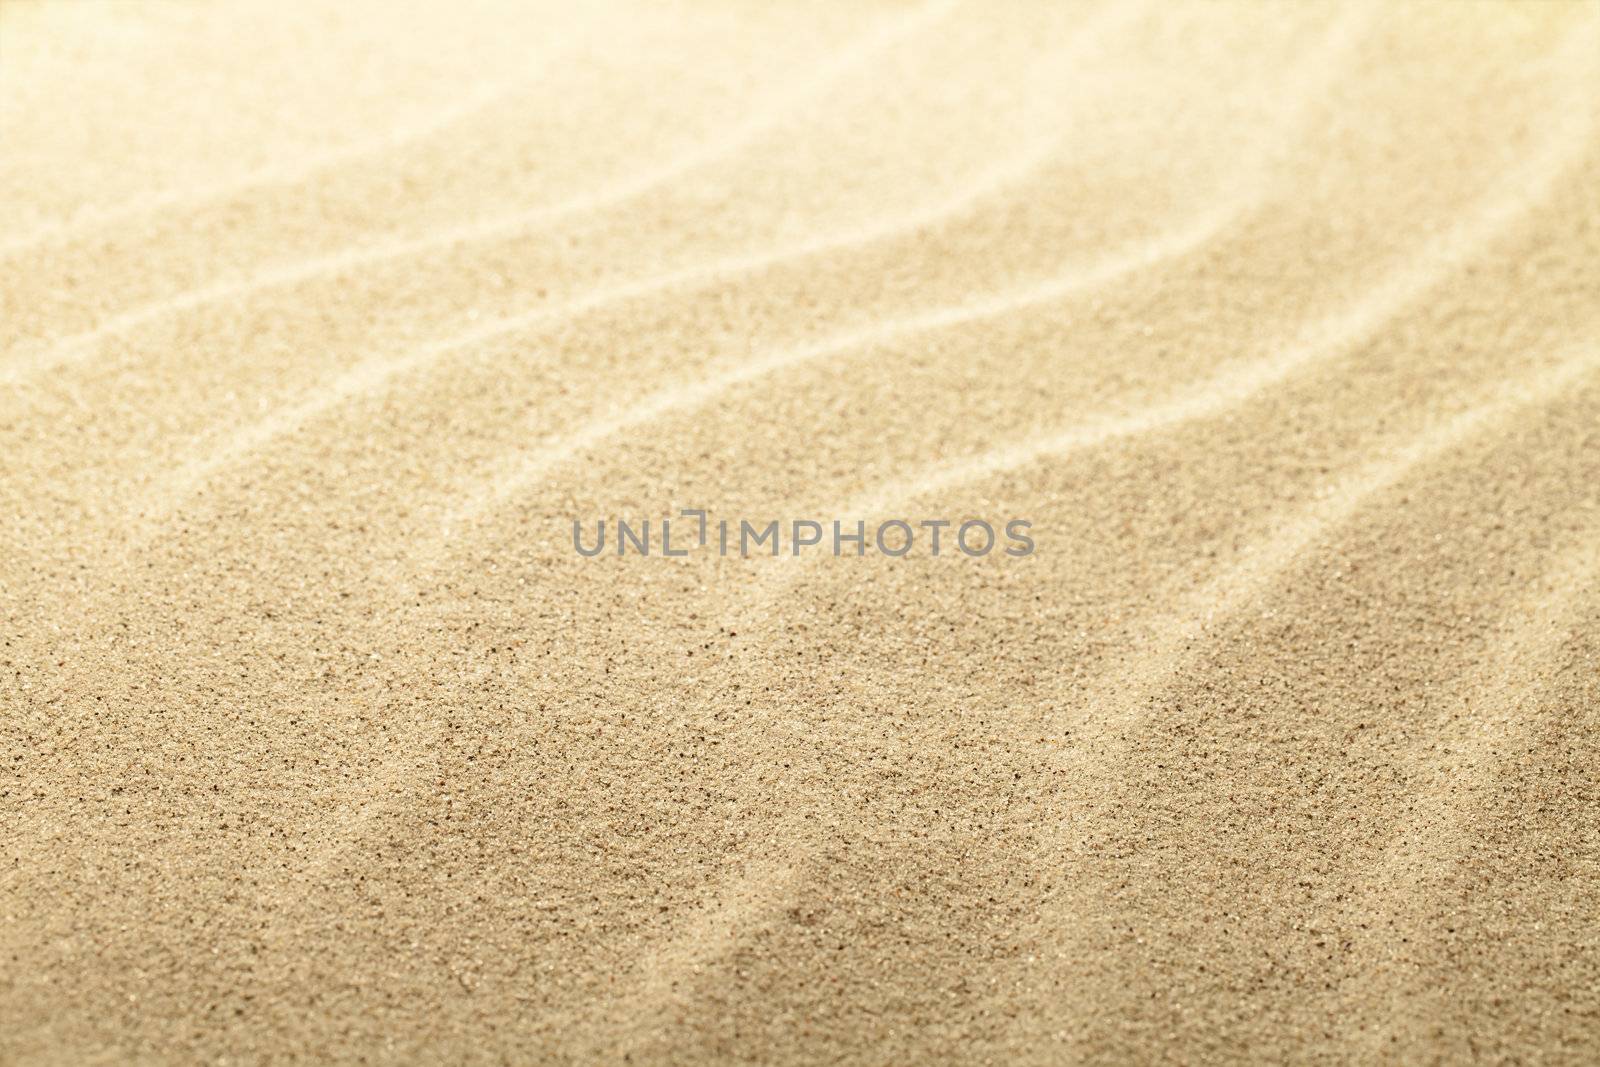 Beach sand background, sandy waves close up view